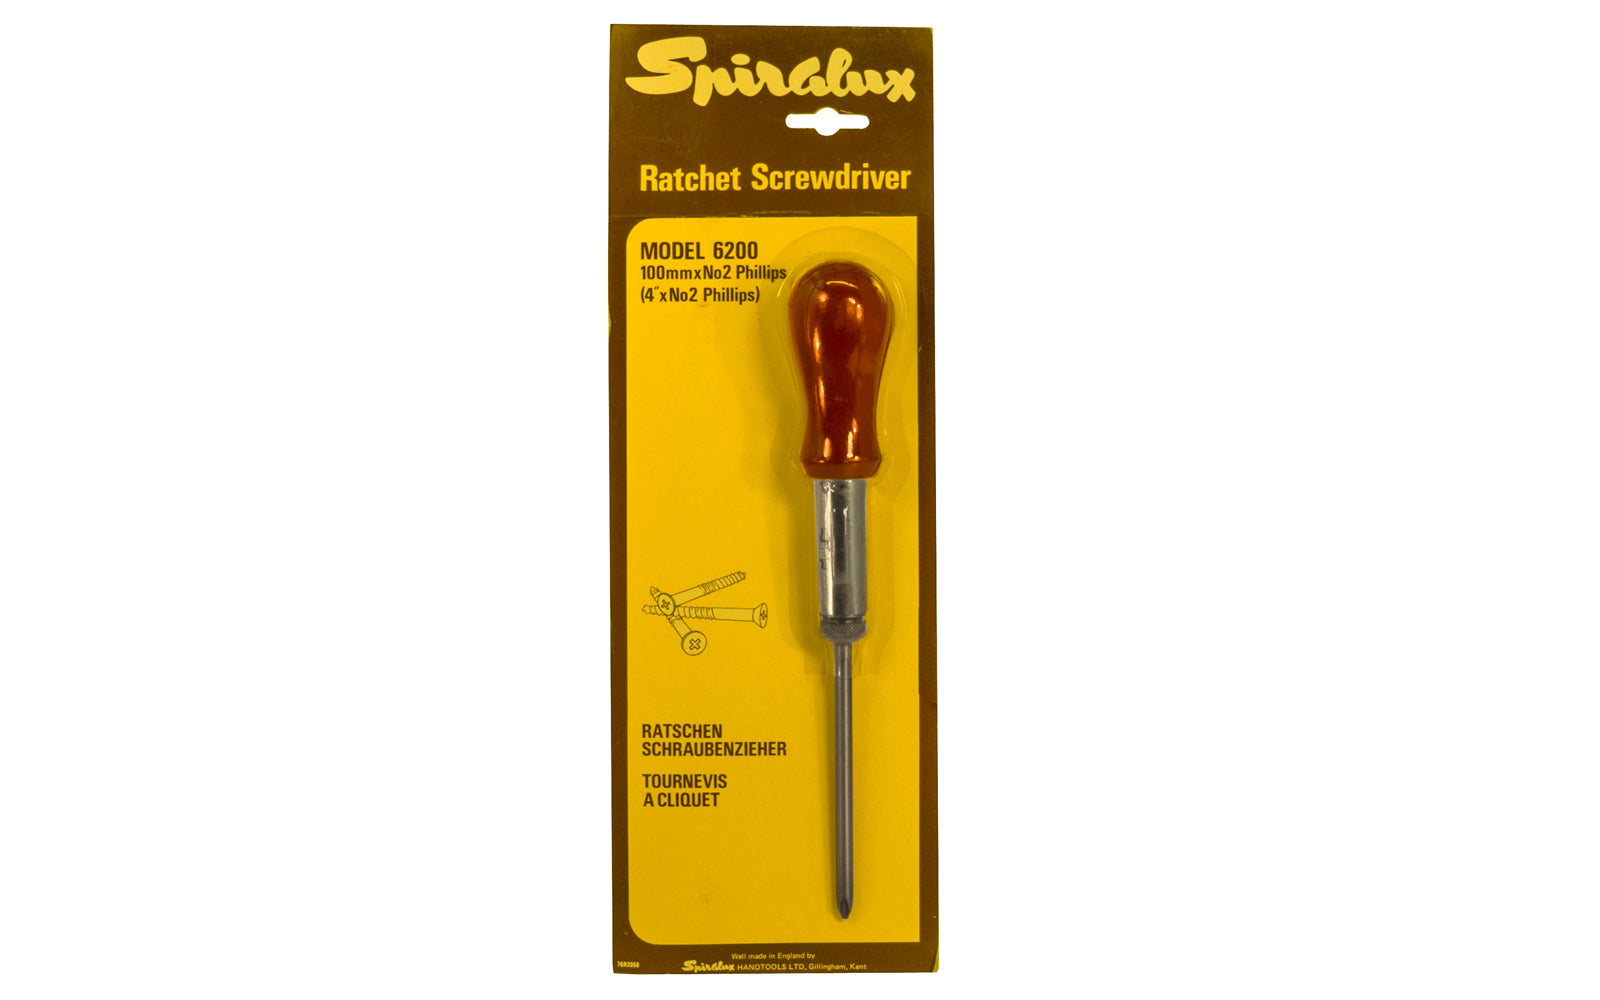 Spiralux screwdriver with No. 2 Phillips. Fully heat treated & tempered bar for long life. Ratcheting Spiralux screwdriver - 4" long blade (100 mm). Model No. 6200.  Brand new old stock.   Made in Gillingham, Kent. England